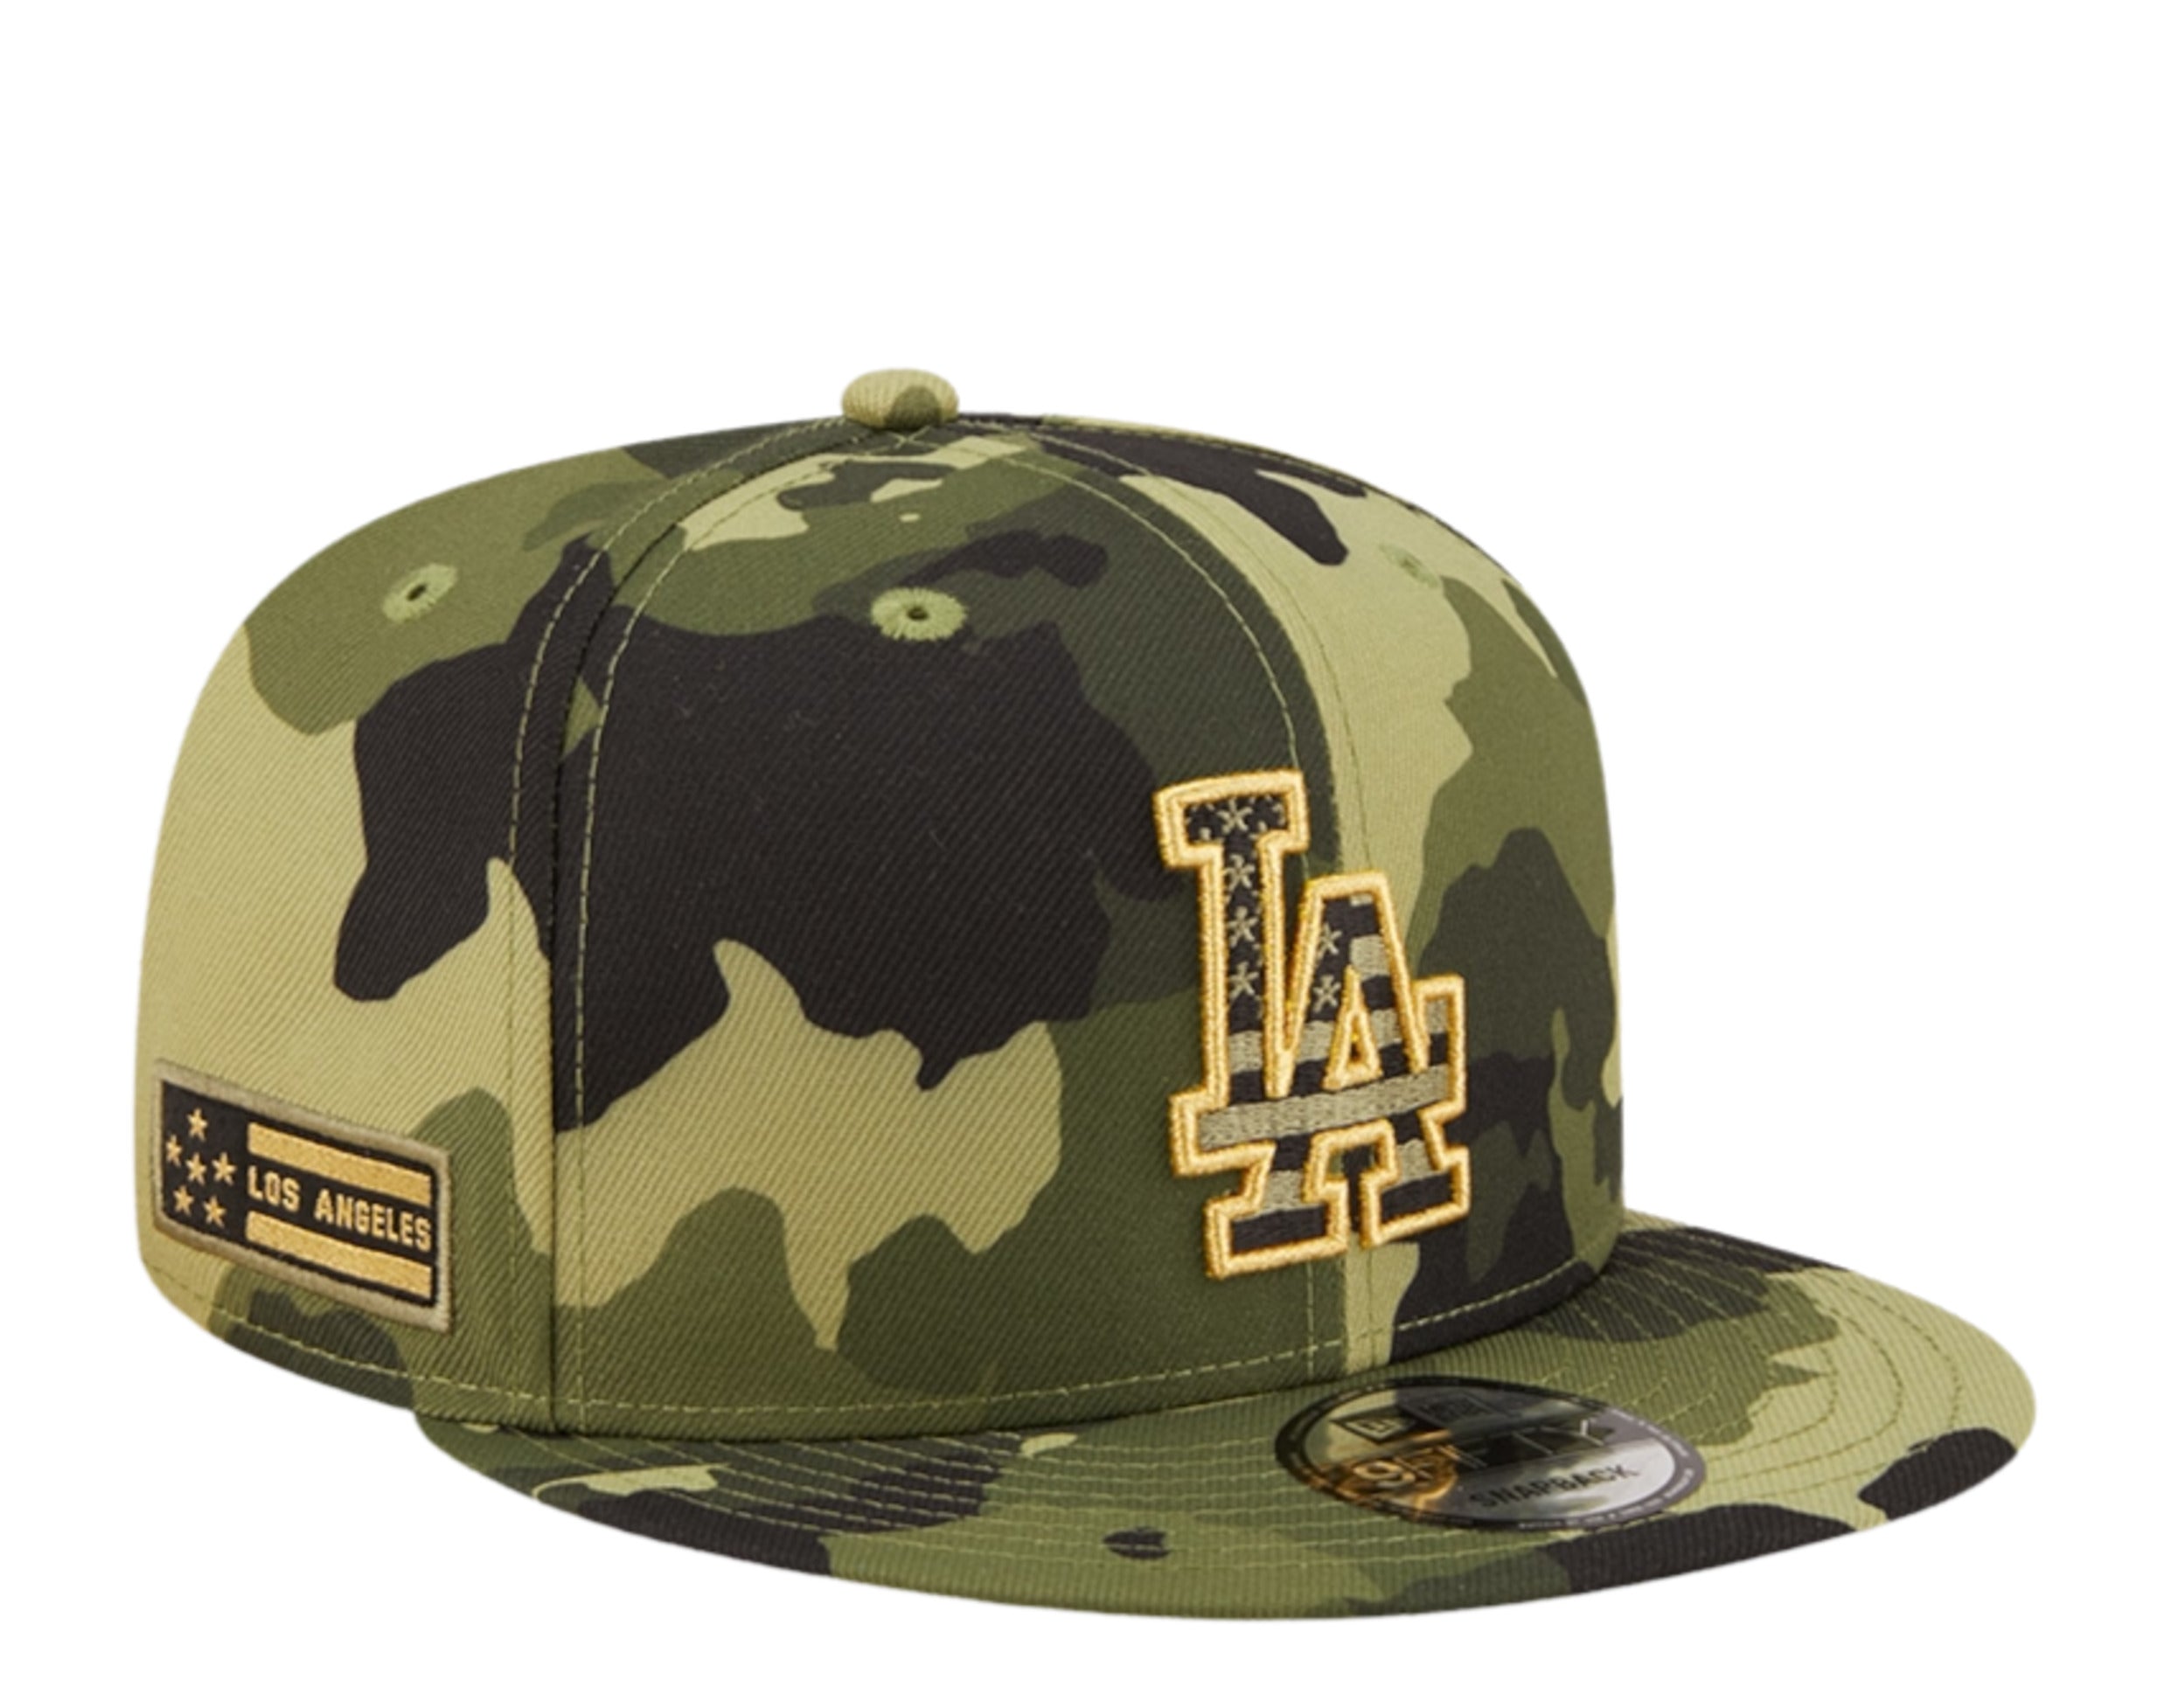 New Era 9Fifty MLB Los Angeles Dodgers Armed Forces Weekend